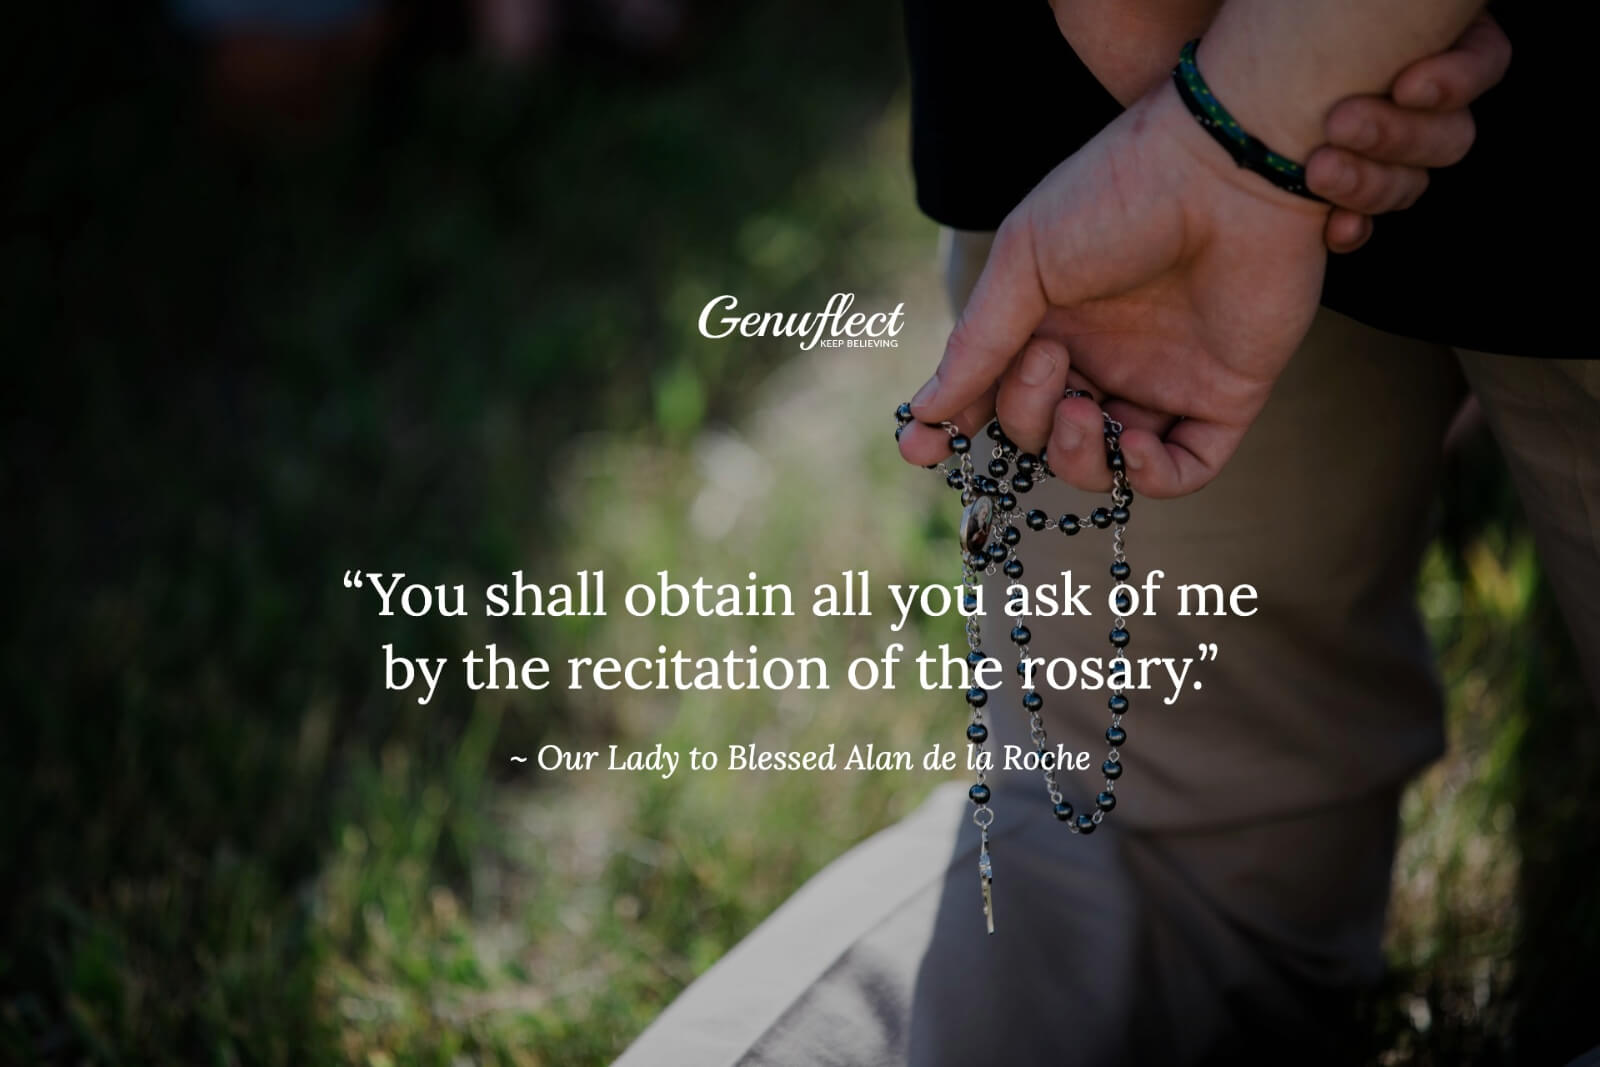 Close up of a man's hand holding a black rosary in prayer